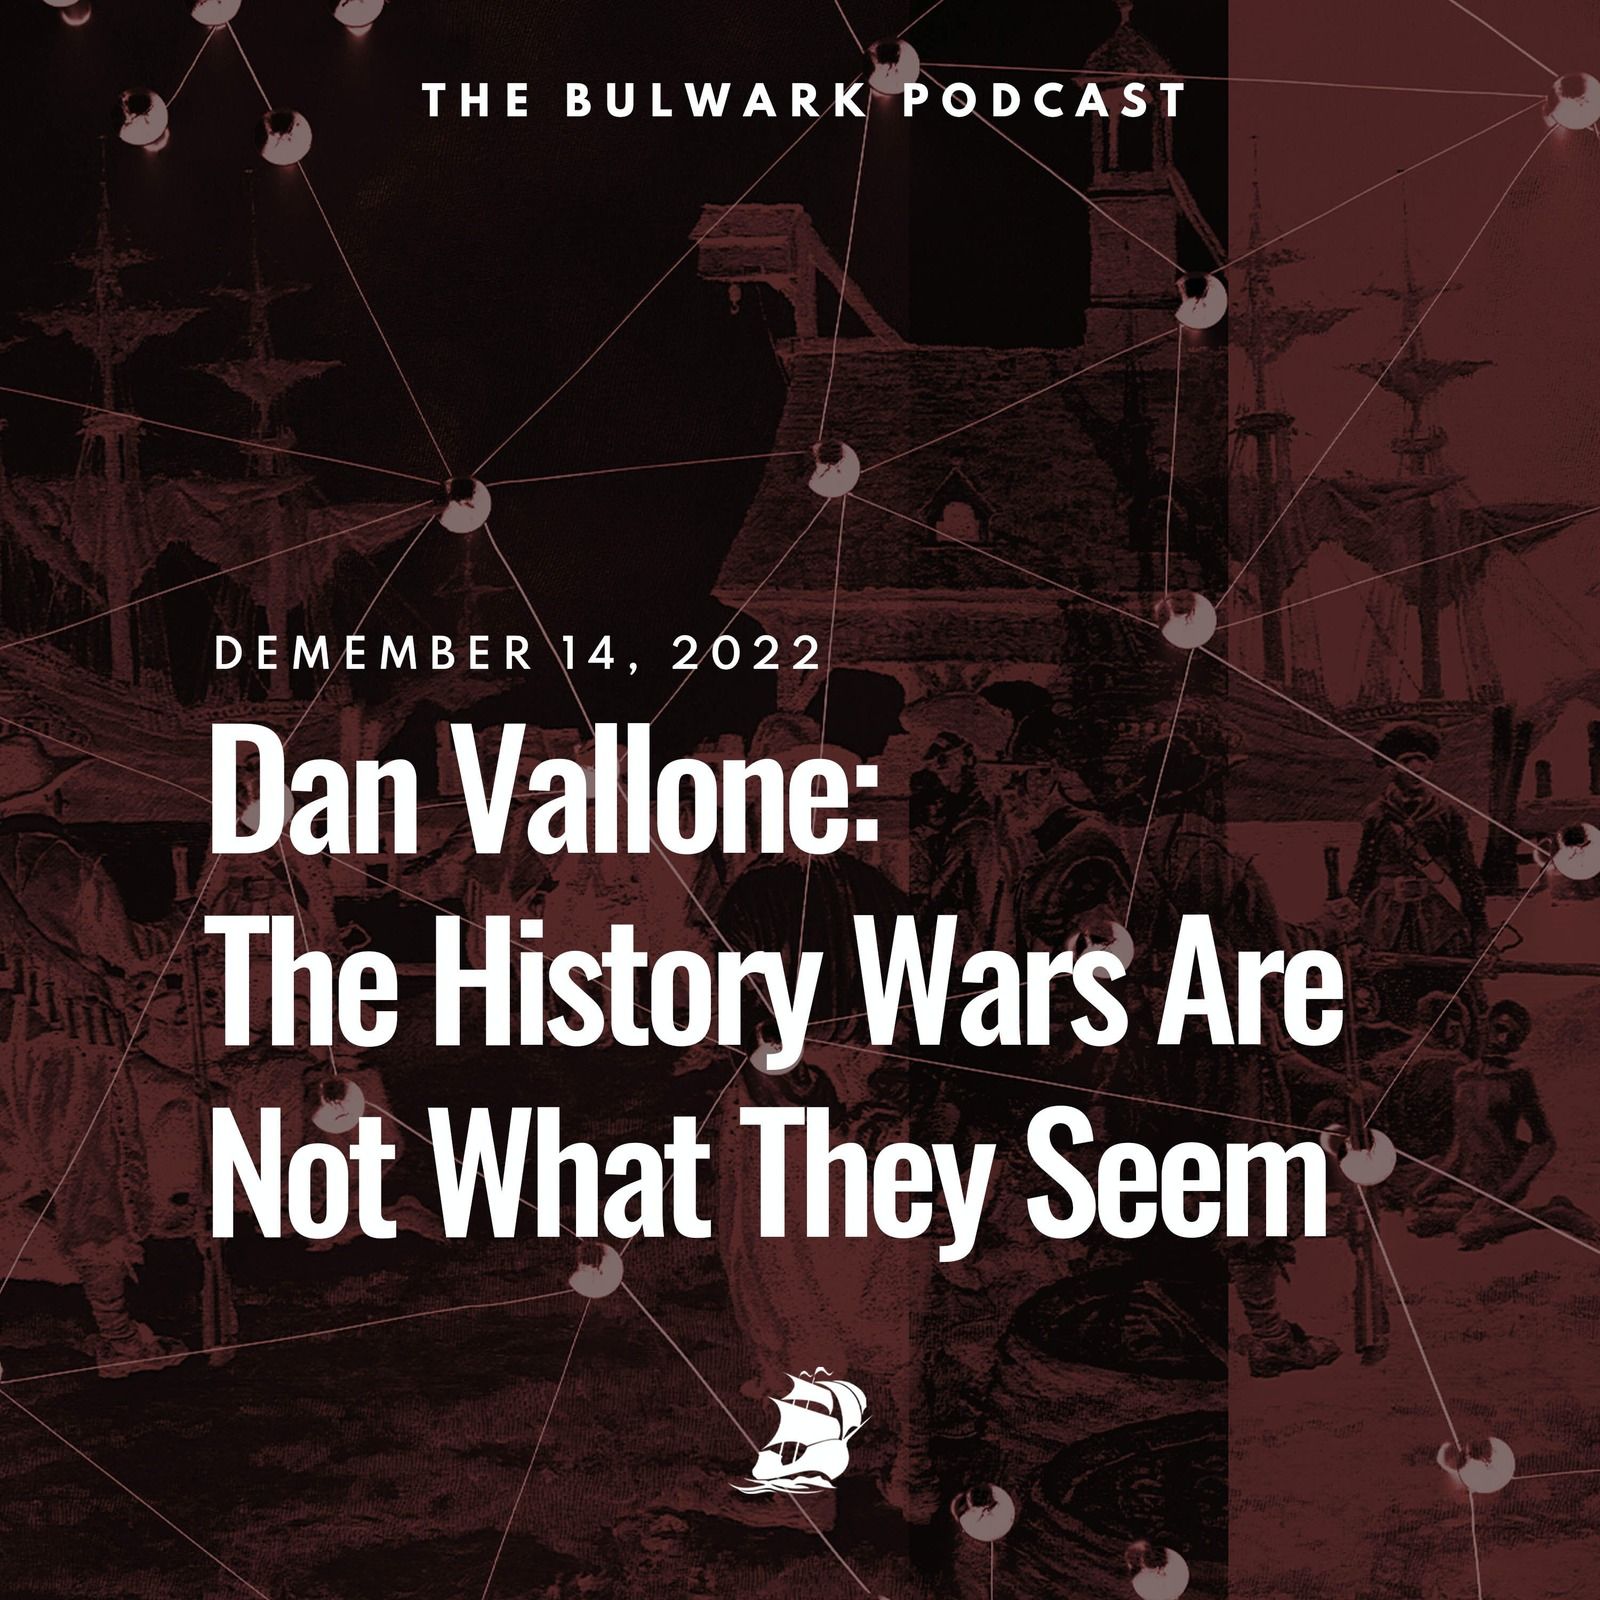 Dan Vallone: The History Wars Are Not What They Seem